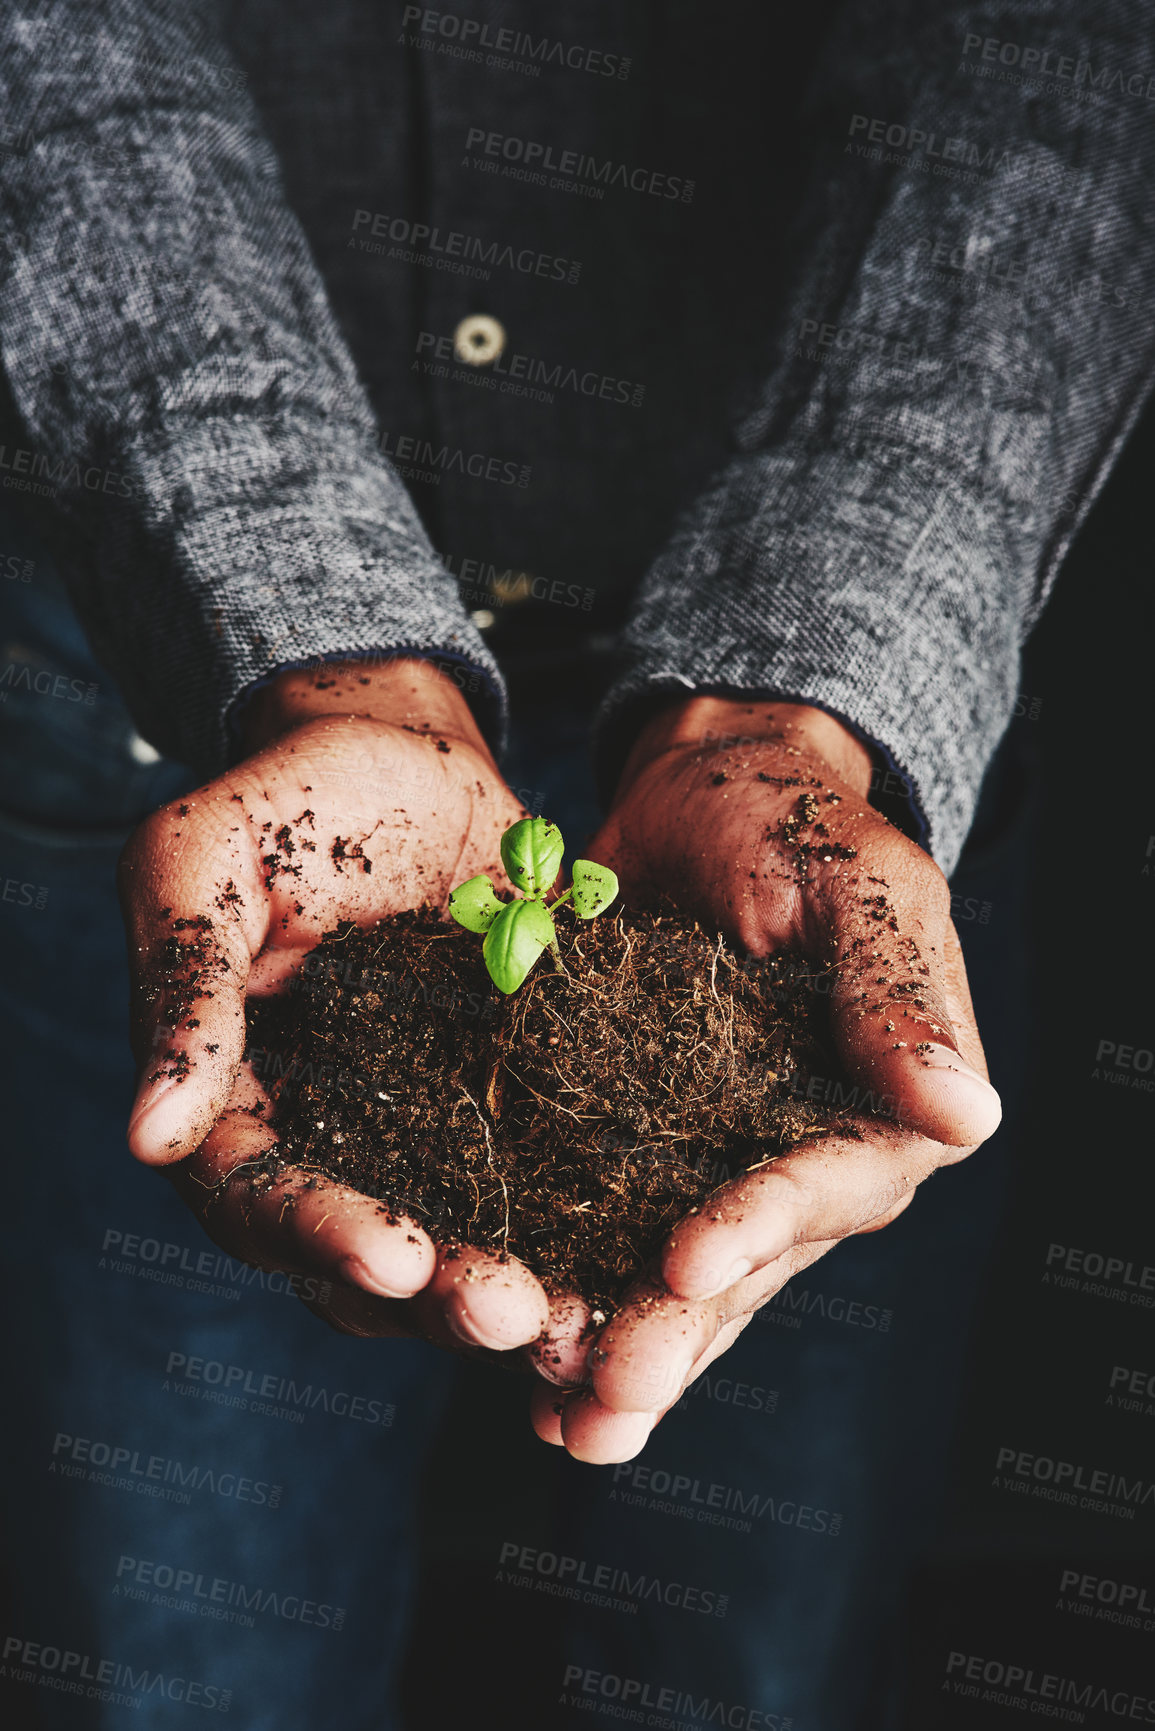 Buy stock photo Cropped shot of an unrecognizable man holding a budding plant